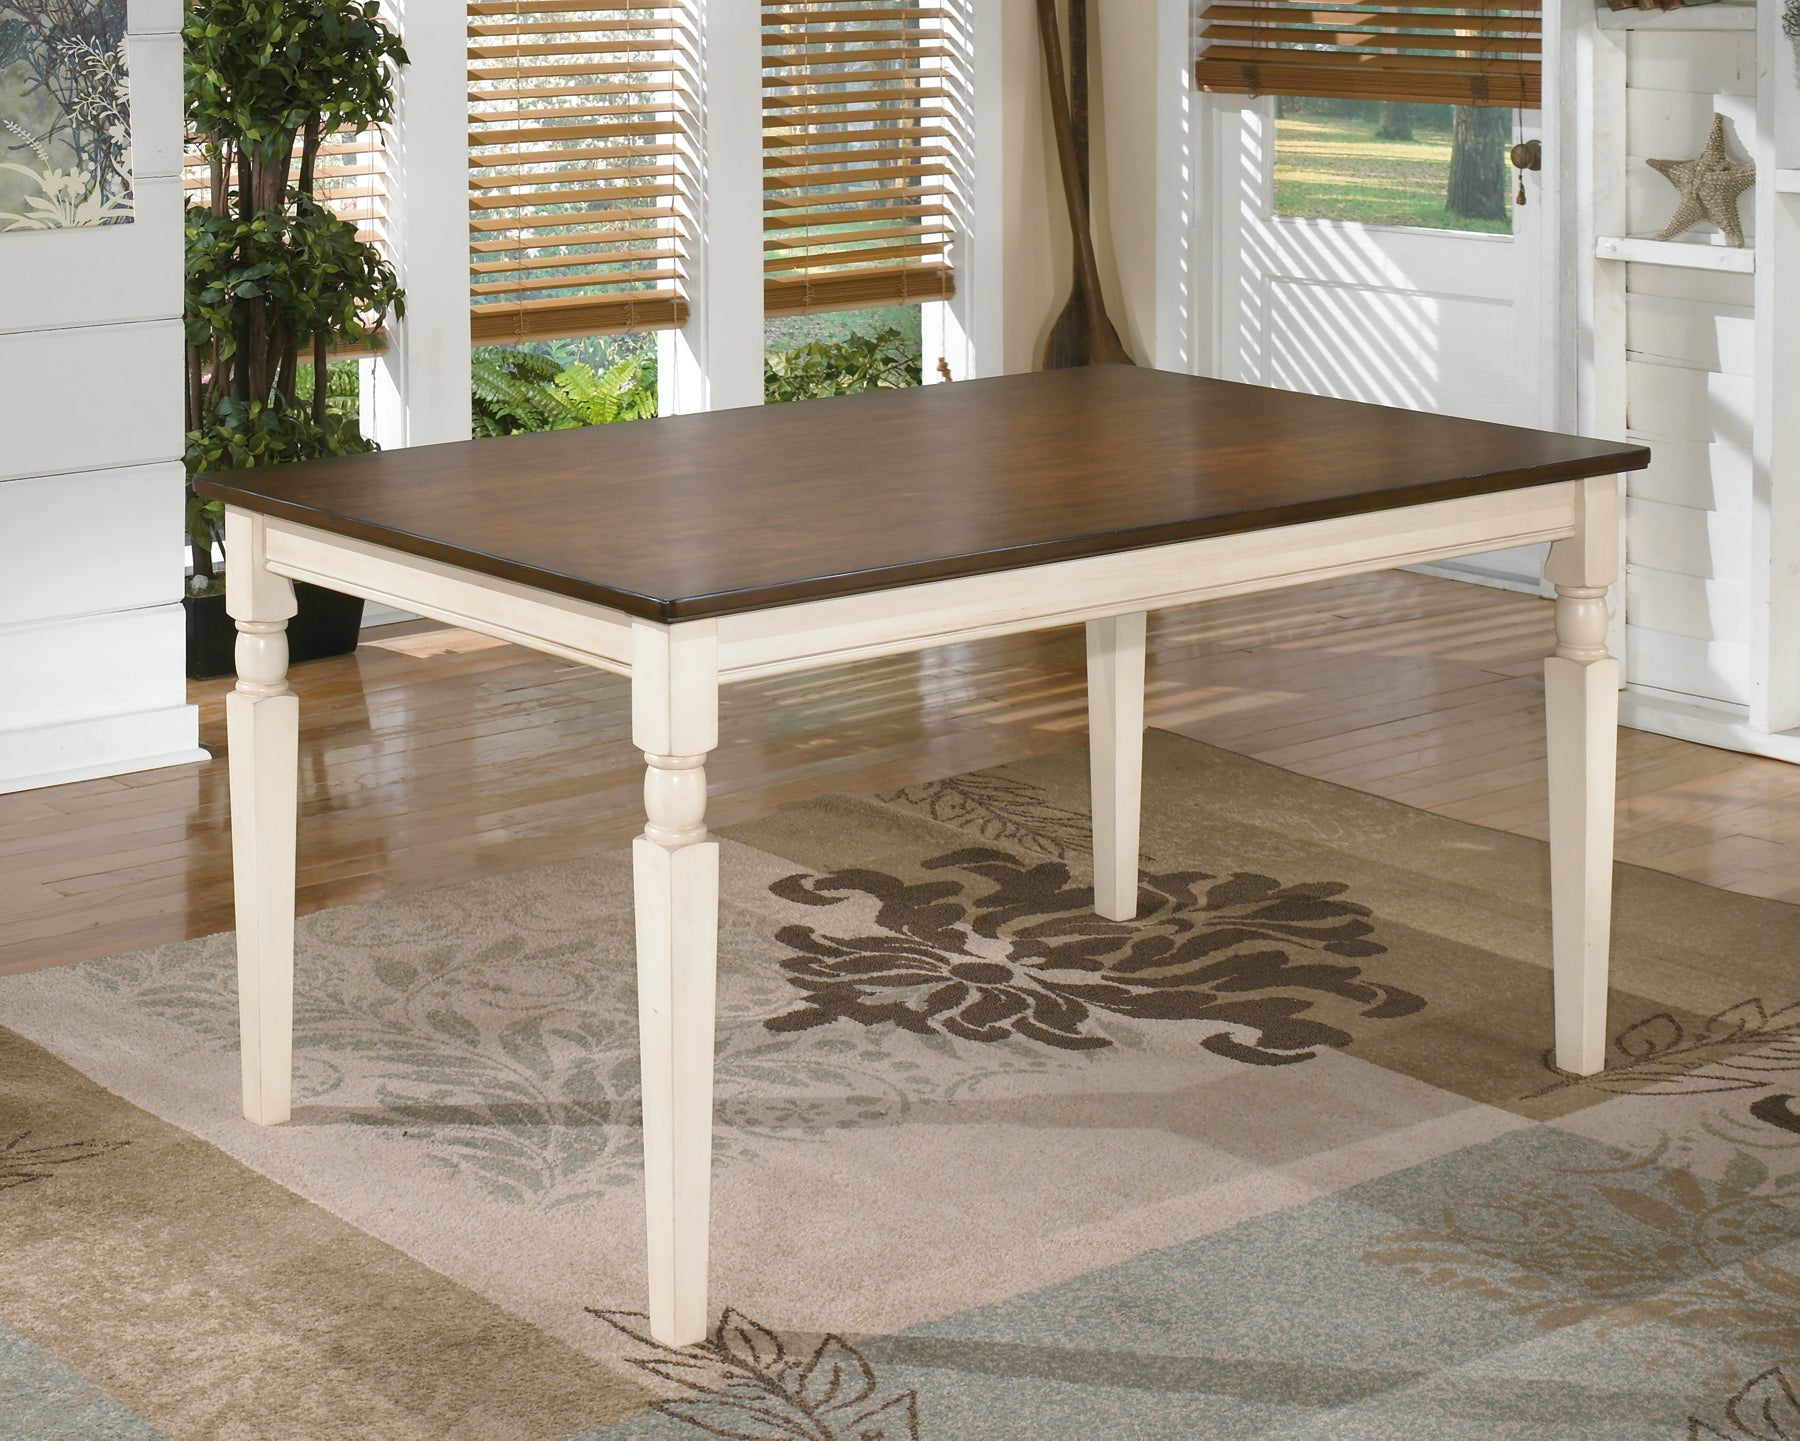 Whitesburg Dining Table and 6 Chairs JB's Furniture  Home Furniture, Home Decor, Furniture Store